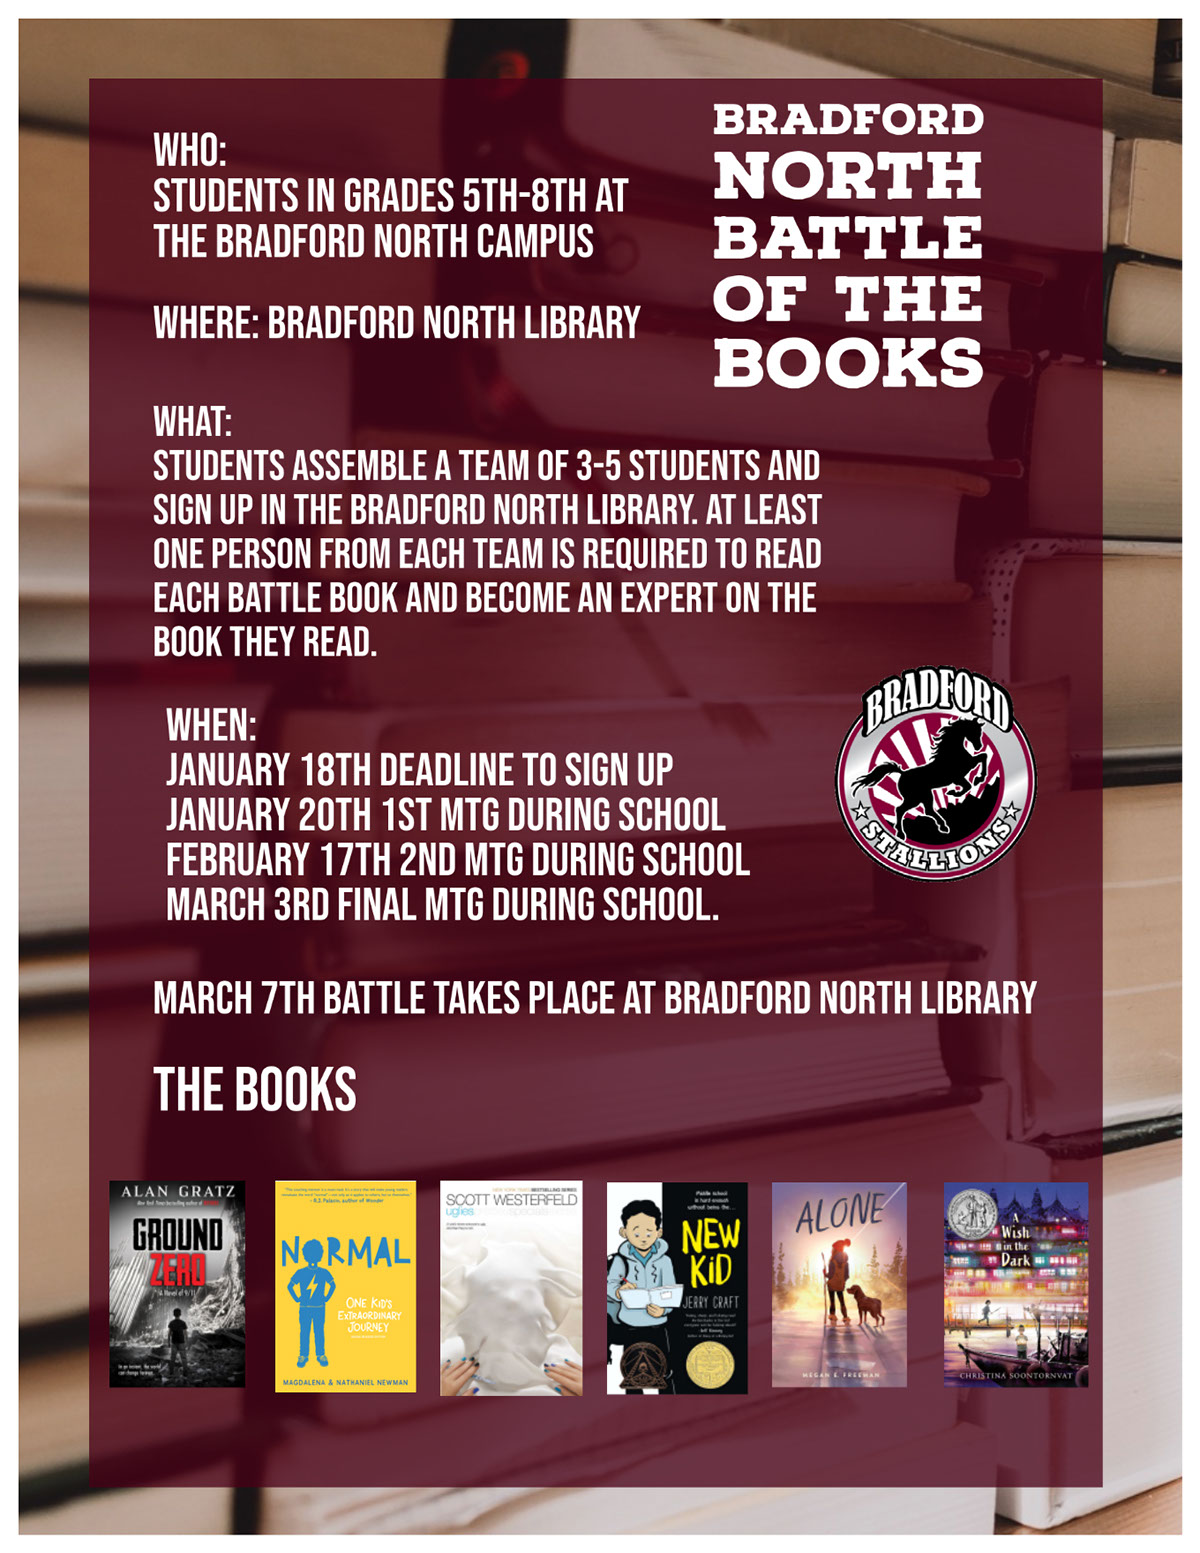 Bradford North Battle of the Books Bradford North Battle of the Books The Books Where: Bradford North Library March 7th Battle Takes Place at Bradford North Library Who: Students in grades 5th-8th at the Bradford North campus When: January 18th deadline to sign up January 20th 1st mtg during school February 17th 2nd mtg during school March 3rd final mtg during school. What: Students Assemble a team of 3-5 students and sign up in the Bradford North Library. At least one person from each team is required to read each battle book and become an EXPERT on the book they read.